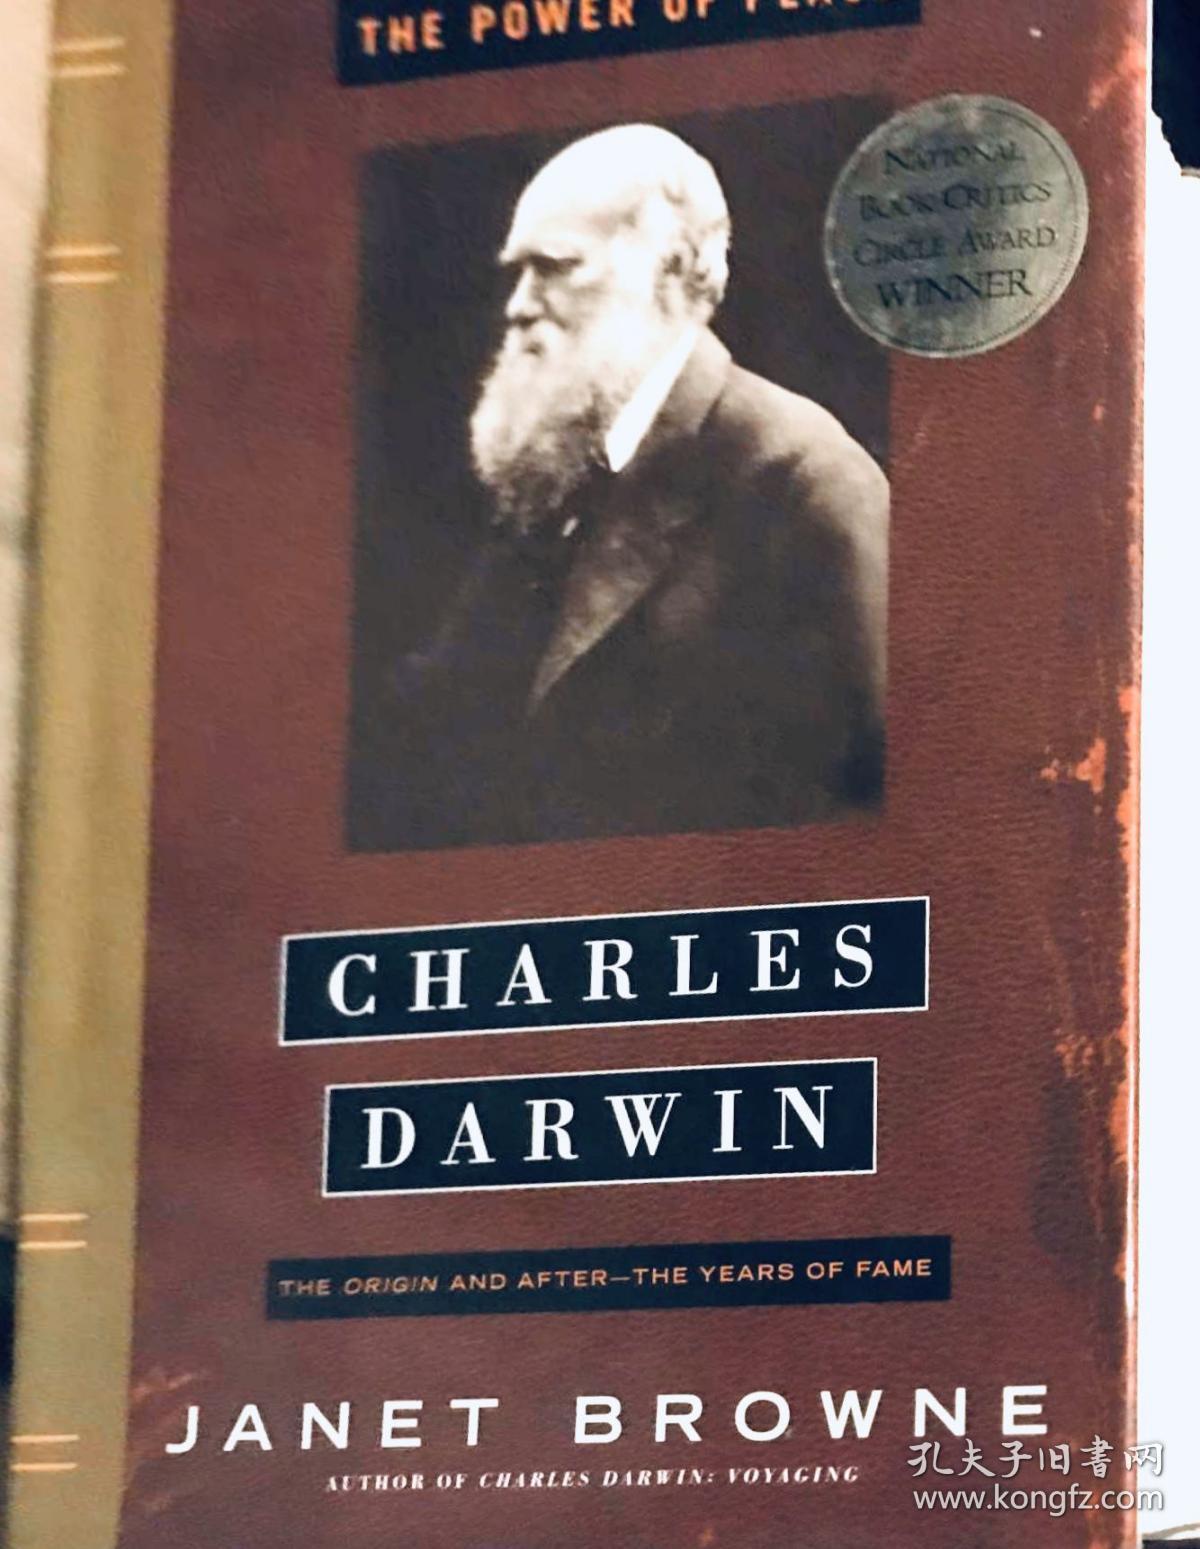 The power of place Charles Darwin The origin and after-the years of fame revolutionism 英文原版精装毛边书厚本